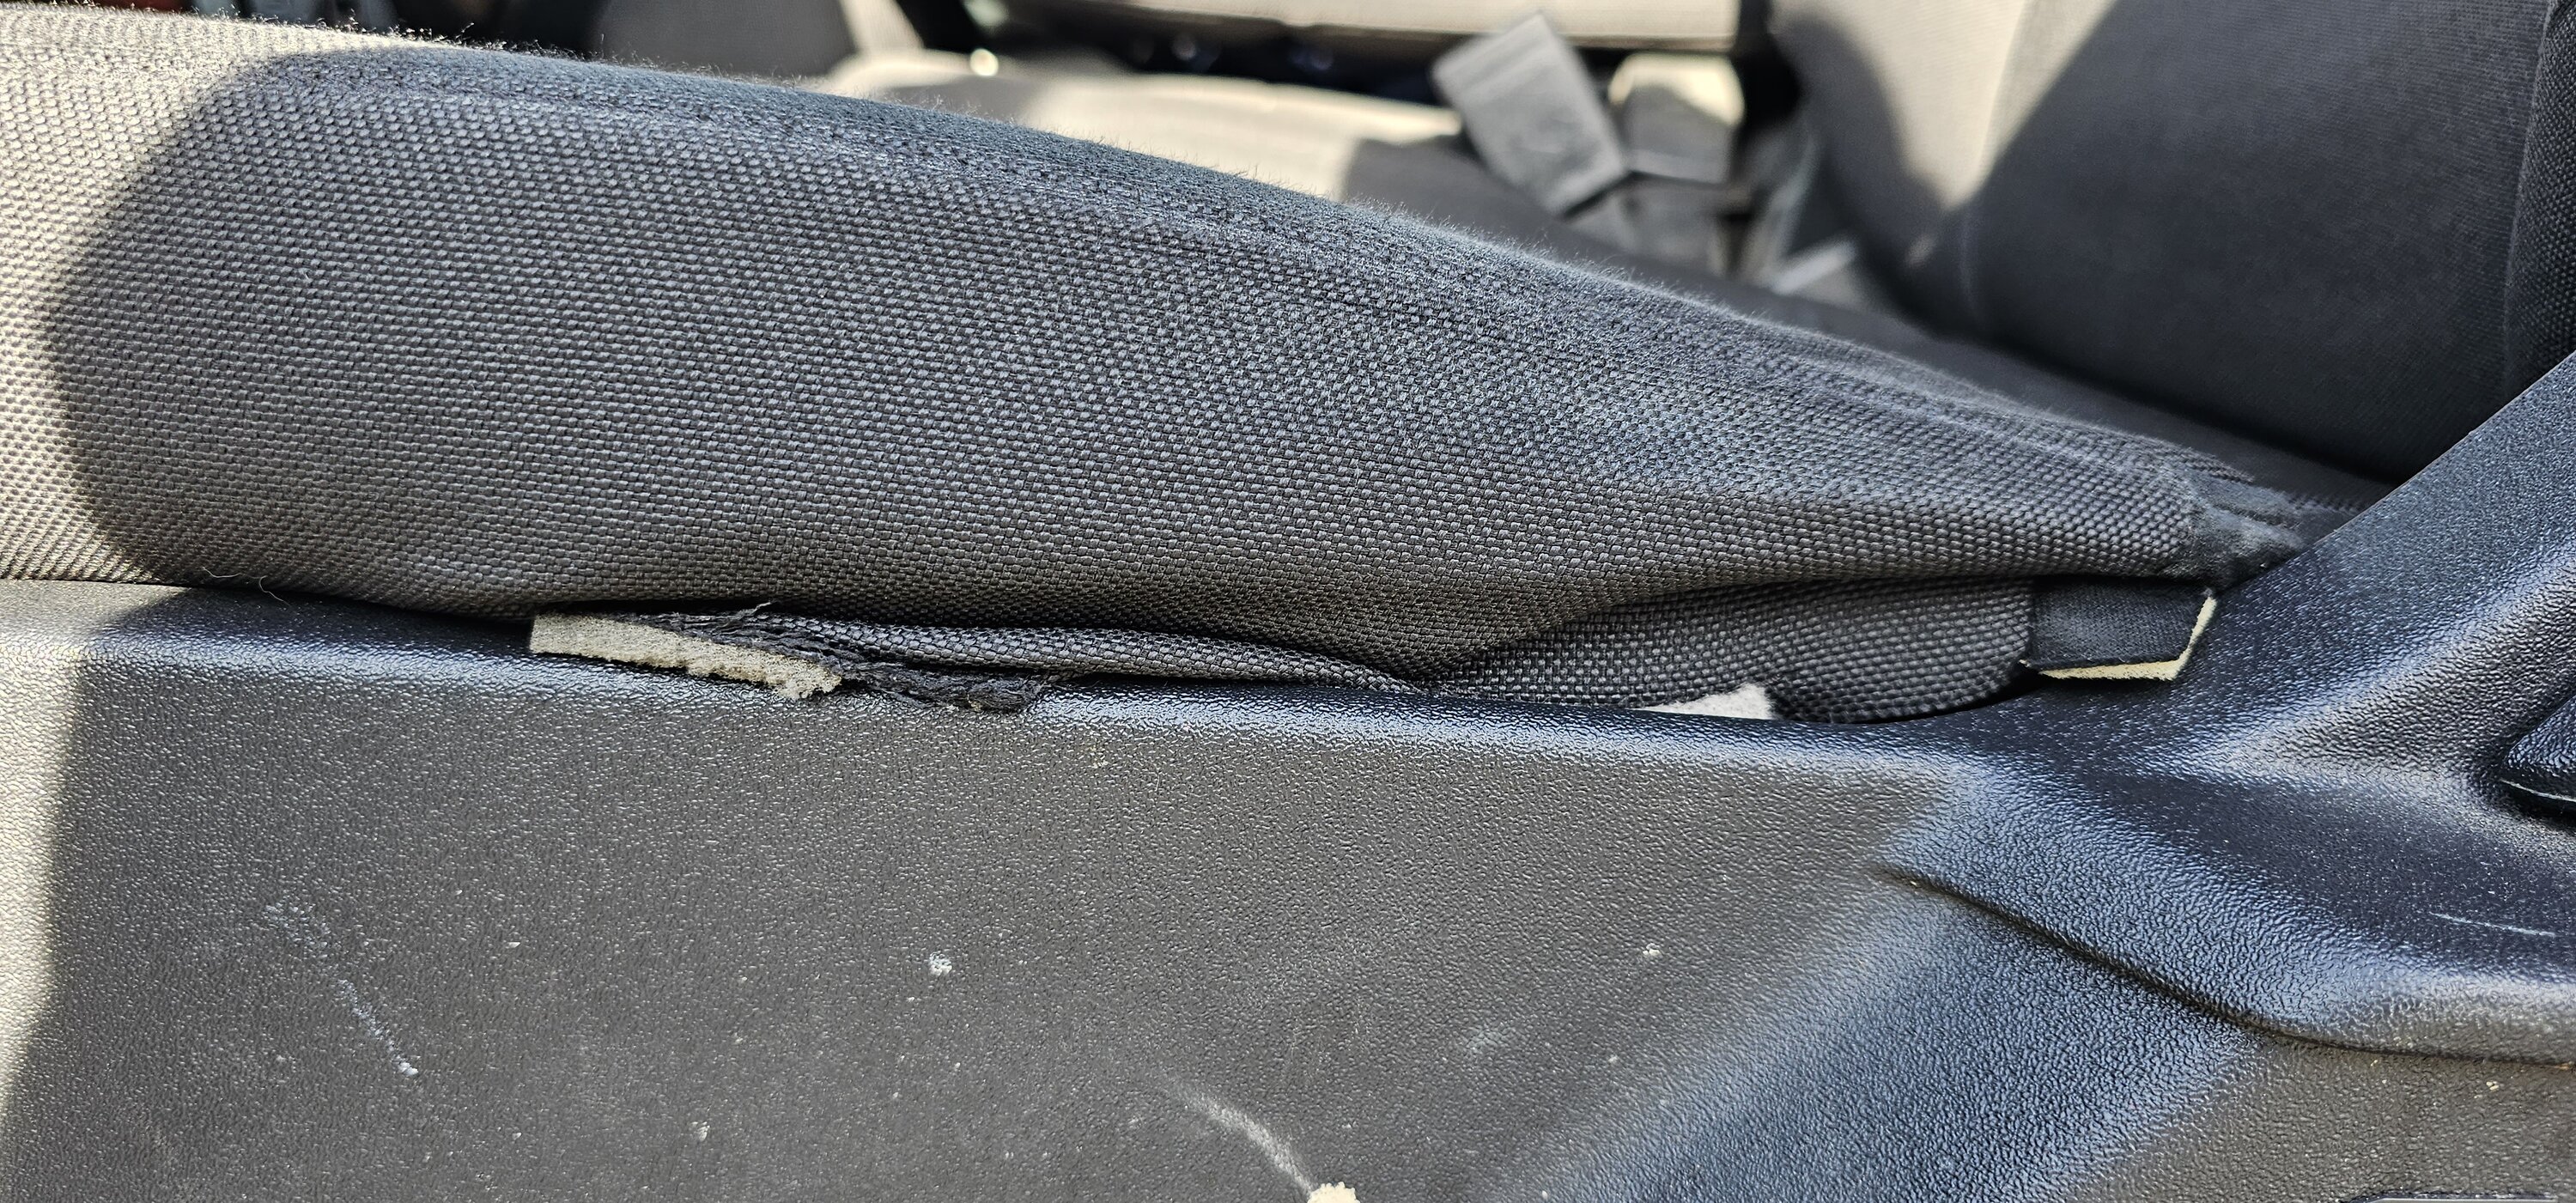 Ford Bronco Tear in side of MVG seat 20230605_090049